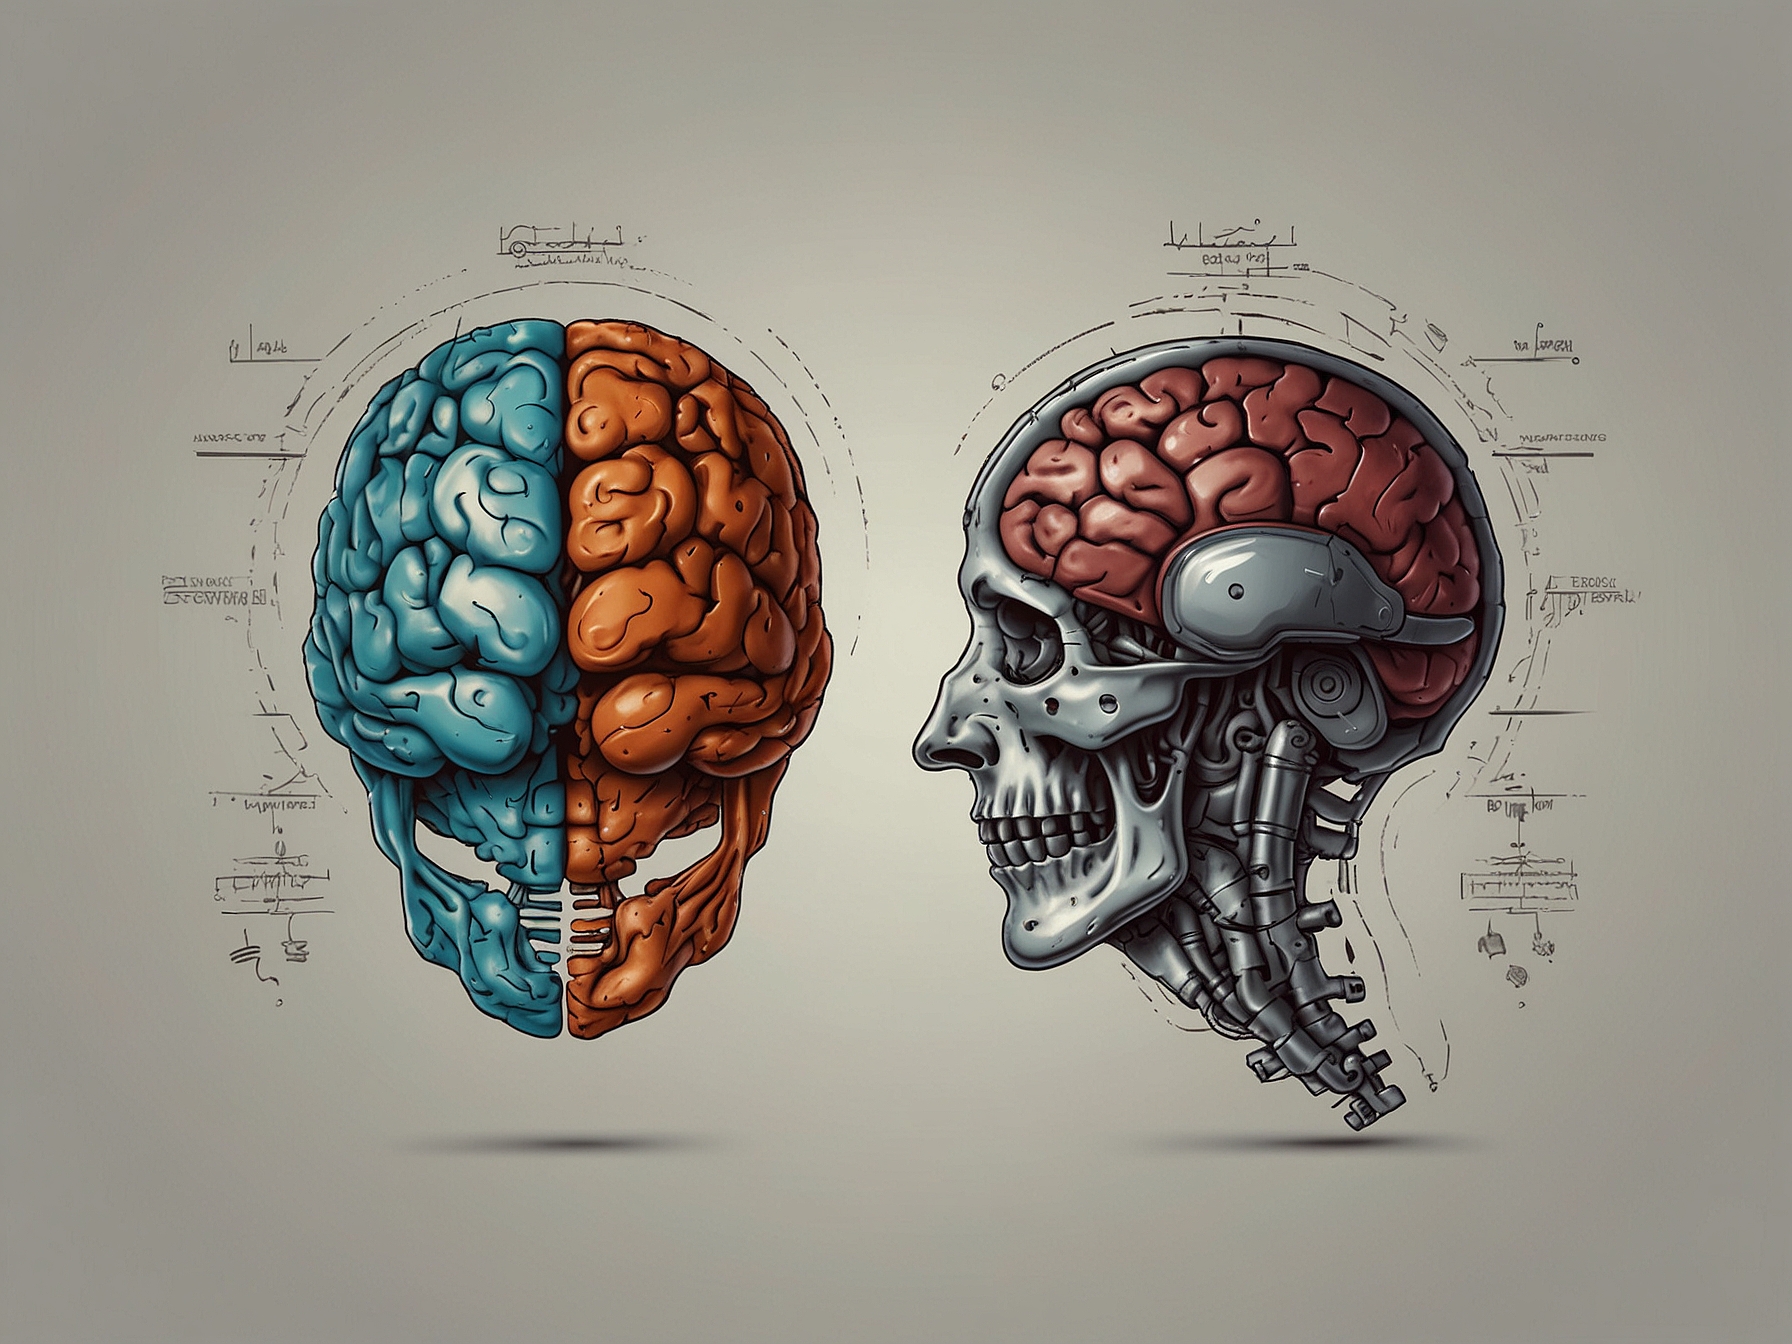 An illustration showing a human brain and a robotic brain side by side, symbolizing the comparison between human analytical skills and AI capabilities.